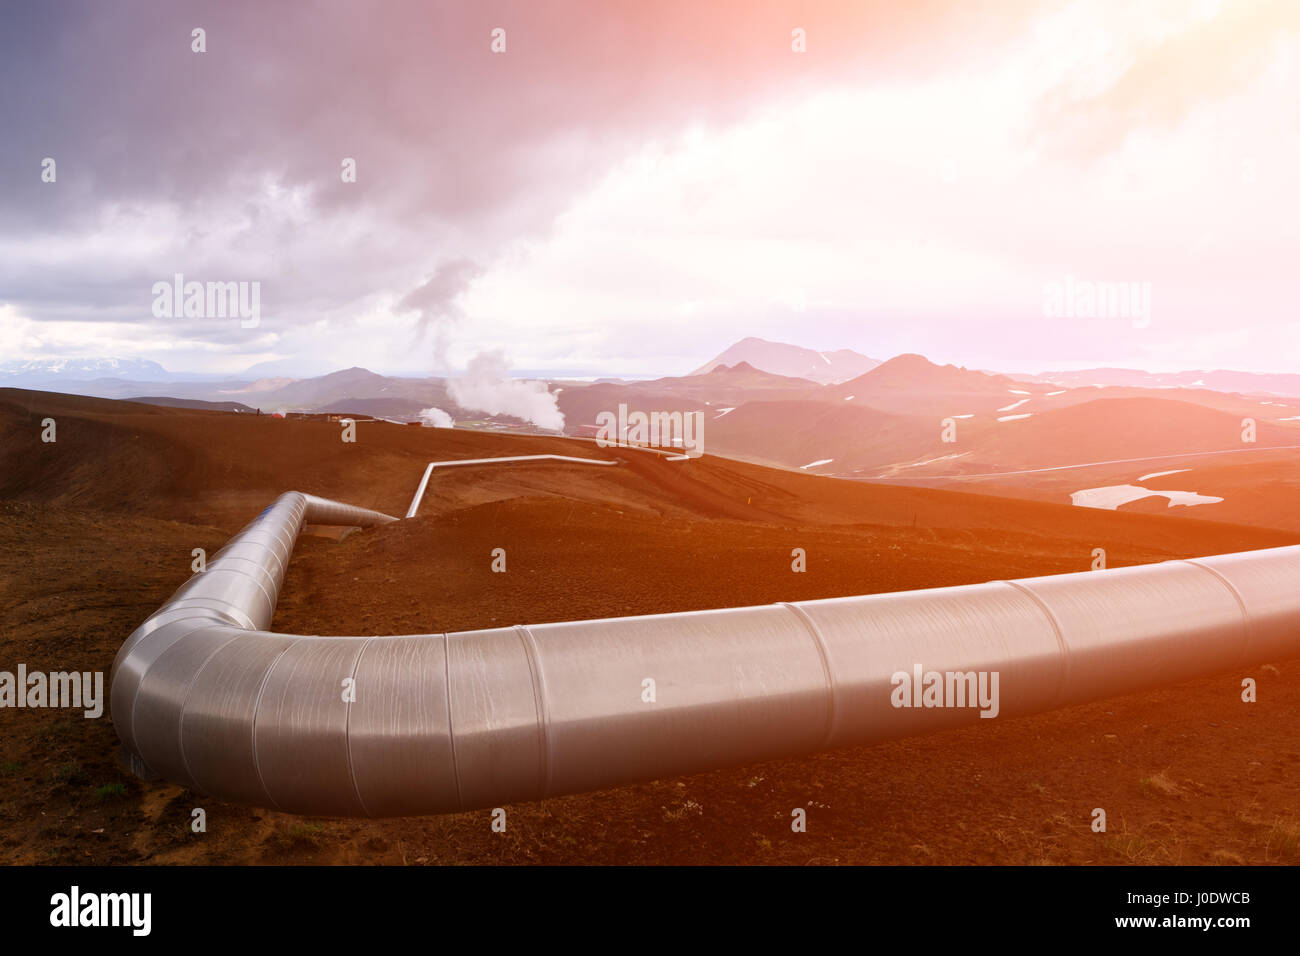 Iceland landscape with pipes in mountains. Geothermal energy in operations. Stock Photo